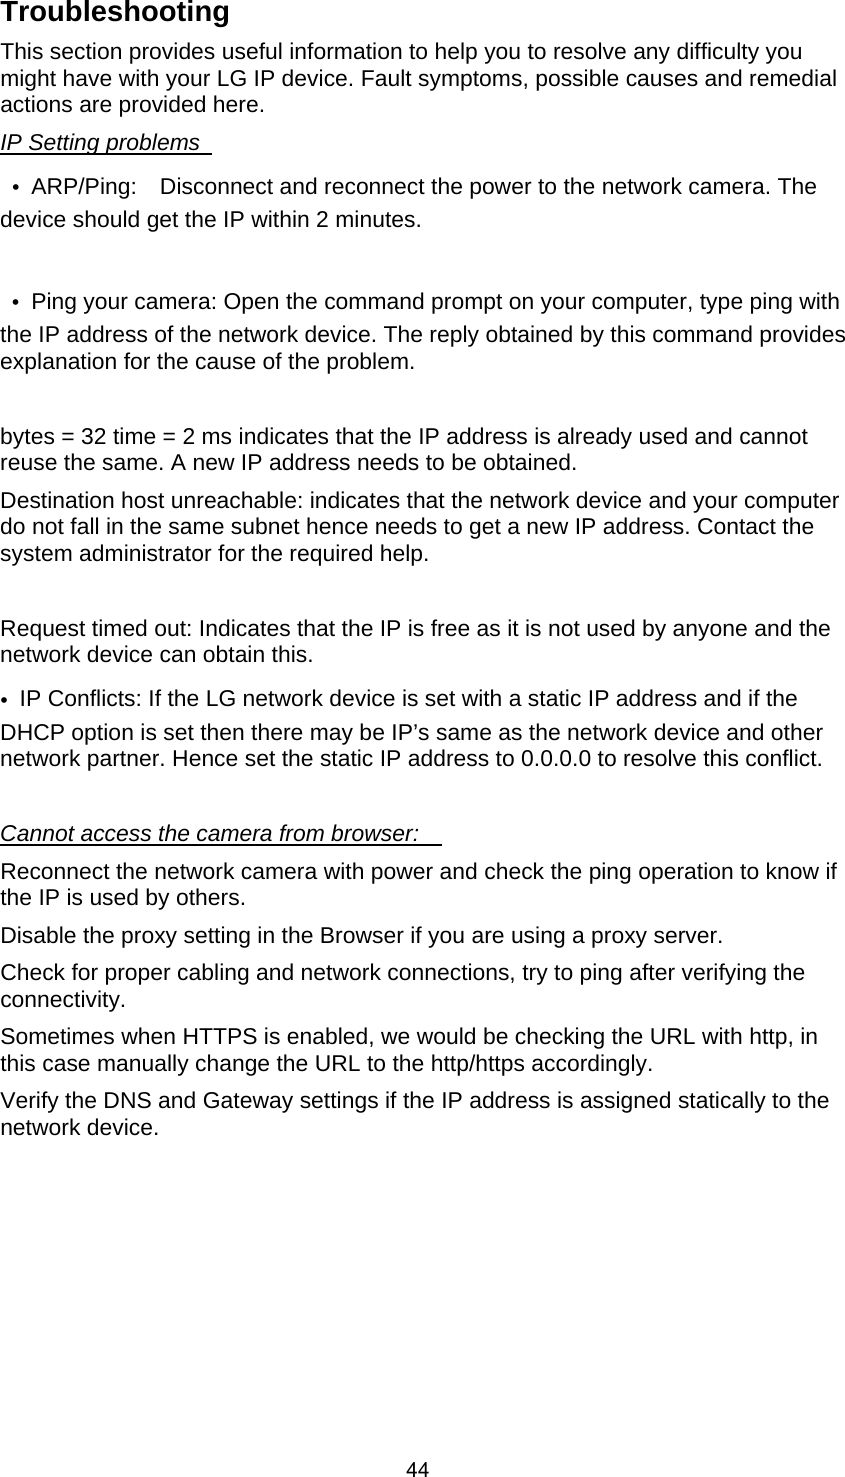  44Troubleshooting   This section provides useful information to help you to resolve any difficulty you might have with your LG IP device. Fault symptoms, possible causes and remedial actions are provided here.     IP Setting problems    •  ARP/Ping:    Disconnect and reconnect the power to the network camera. The device should get the IP within 2 minutes.       •  Ping your camera: Open the command prompt on your computer, type ping with the IP address of the network device. The reply obtained by this command provides explanation for the cause of the problem.        bytes = 32 time = 2 ms indicates that the IP address is already used and cannot reuse the same. A new IP address needs to be obtained.     Destination host unreachable: indicates that the network device and your computer do not fall in the same subnet hence needs to get a new IP address. Contact the system administrator for the required help.    Request timed out: Indicates that the IP is free as it is not used by anyone and the network device can obtain this.     •  IP Conflicts: If the LG network device is set with a static IP address and if the DHCP option is set then there may be IP’s same as the network device and other network partner. Hence set the static IP address to 0.0.0.0 to resolve this conflict.      Cannot access the camera from browser:     Reconnect the network camera with power and check the ping operation to know if the IP is used by others.     Disable the proxy setting in the Browser if you are using a proxy server.     Check for proper cabling and network connections, try to ping after verifying the connectivity.   Sometimes when HTTPS is enabled, we would be checking the URL with http, in this case manually change the URL to the http/https accordingly.     Verify the DNS and Gateway settings if the IP address is assigned statically to the network device. 